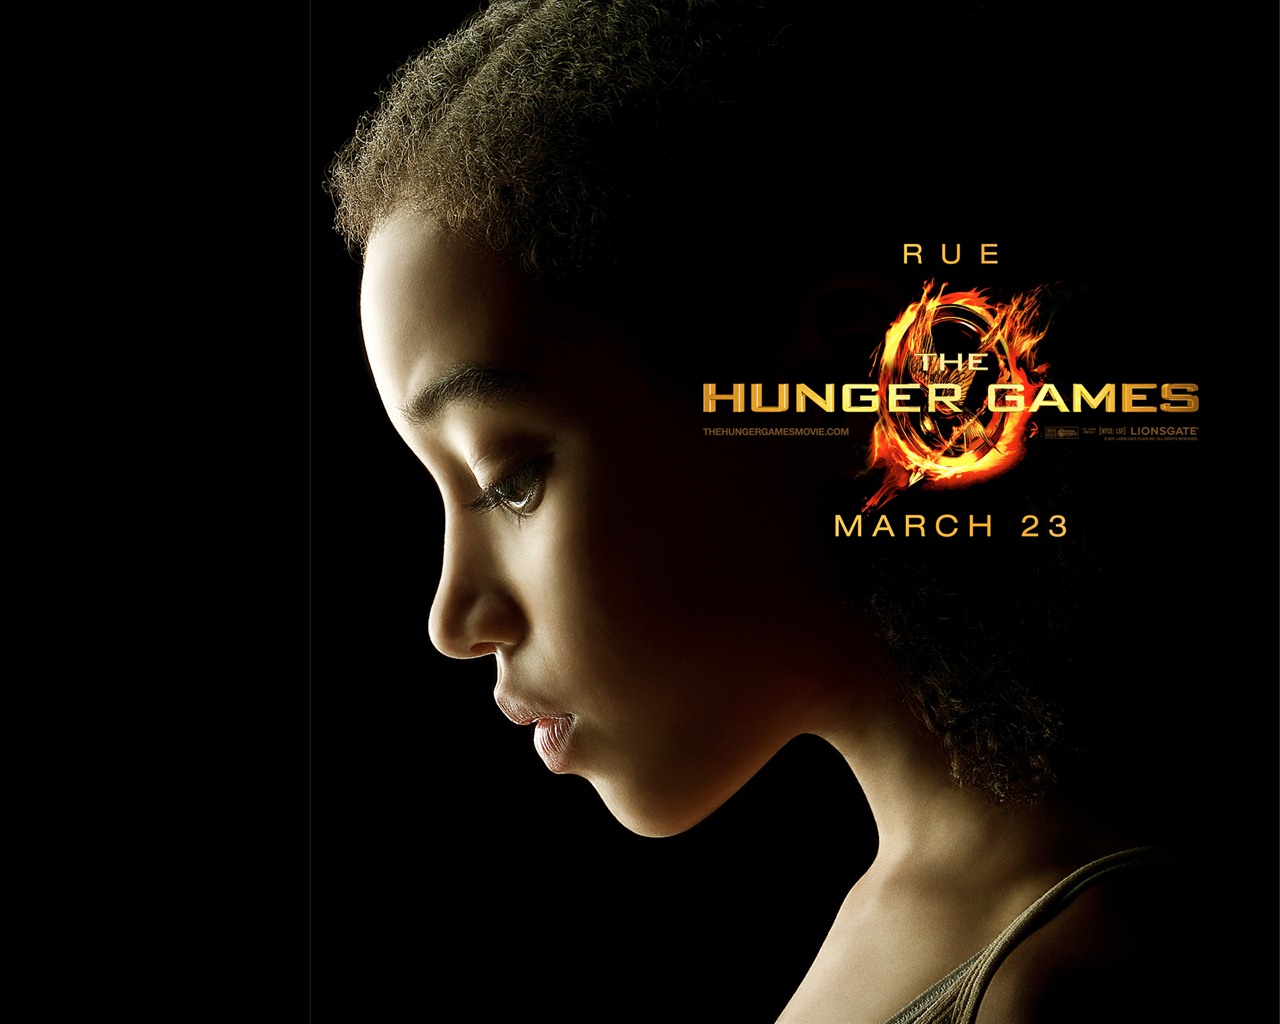 The Hunger Games HD wallpapers #2 - 1280x1024